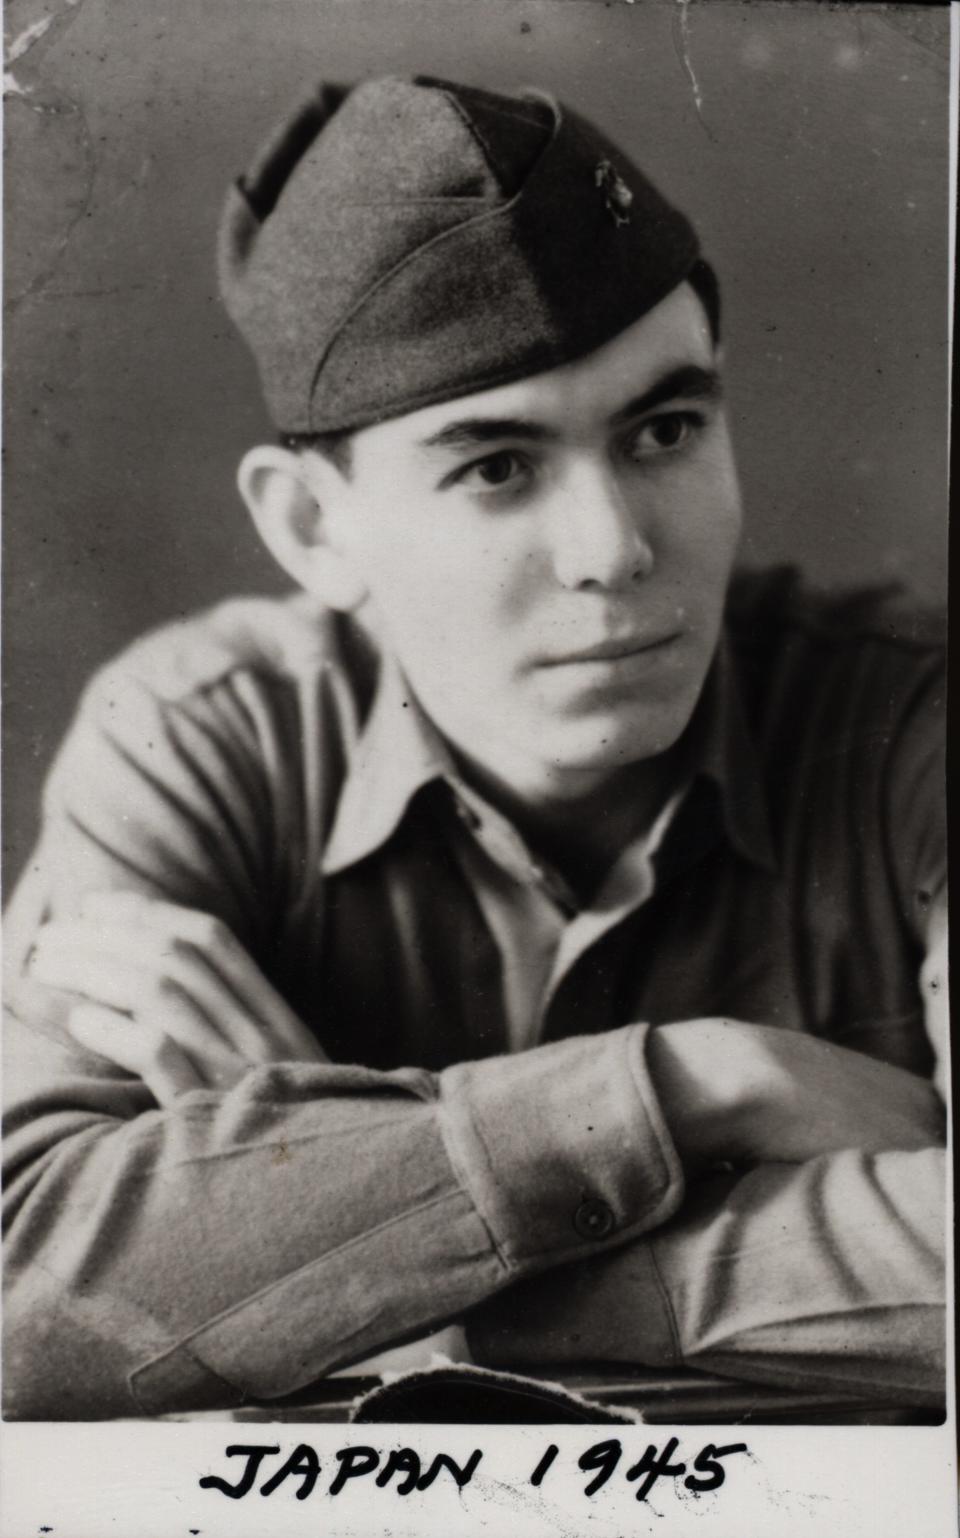 Gonzalo Garza signed up for the Marines in 1944 at age 17. He served in World War II and the Korean War. The GI Bill helped lift this child of migrant farm workers into an education that led to a doctorate and high positions in school administration.